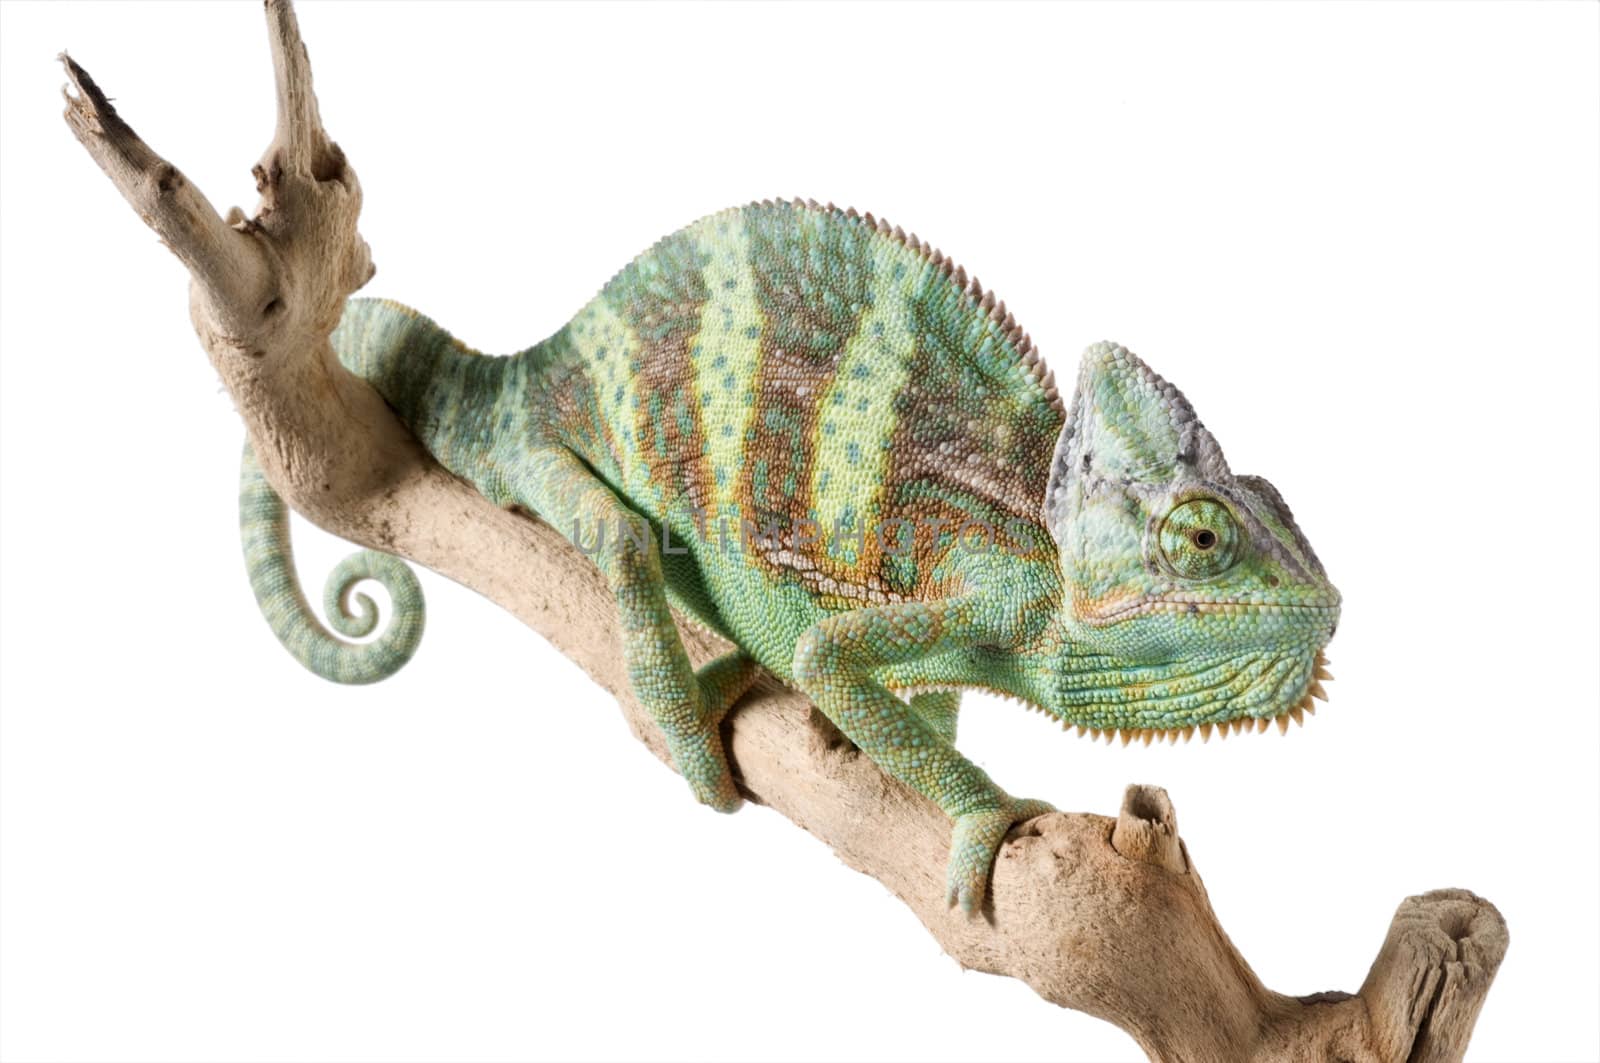 Veiled Chameleon full view with curled tail.